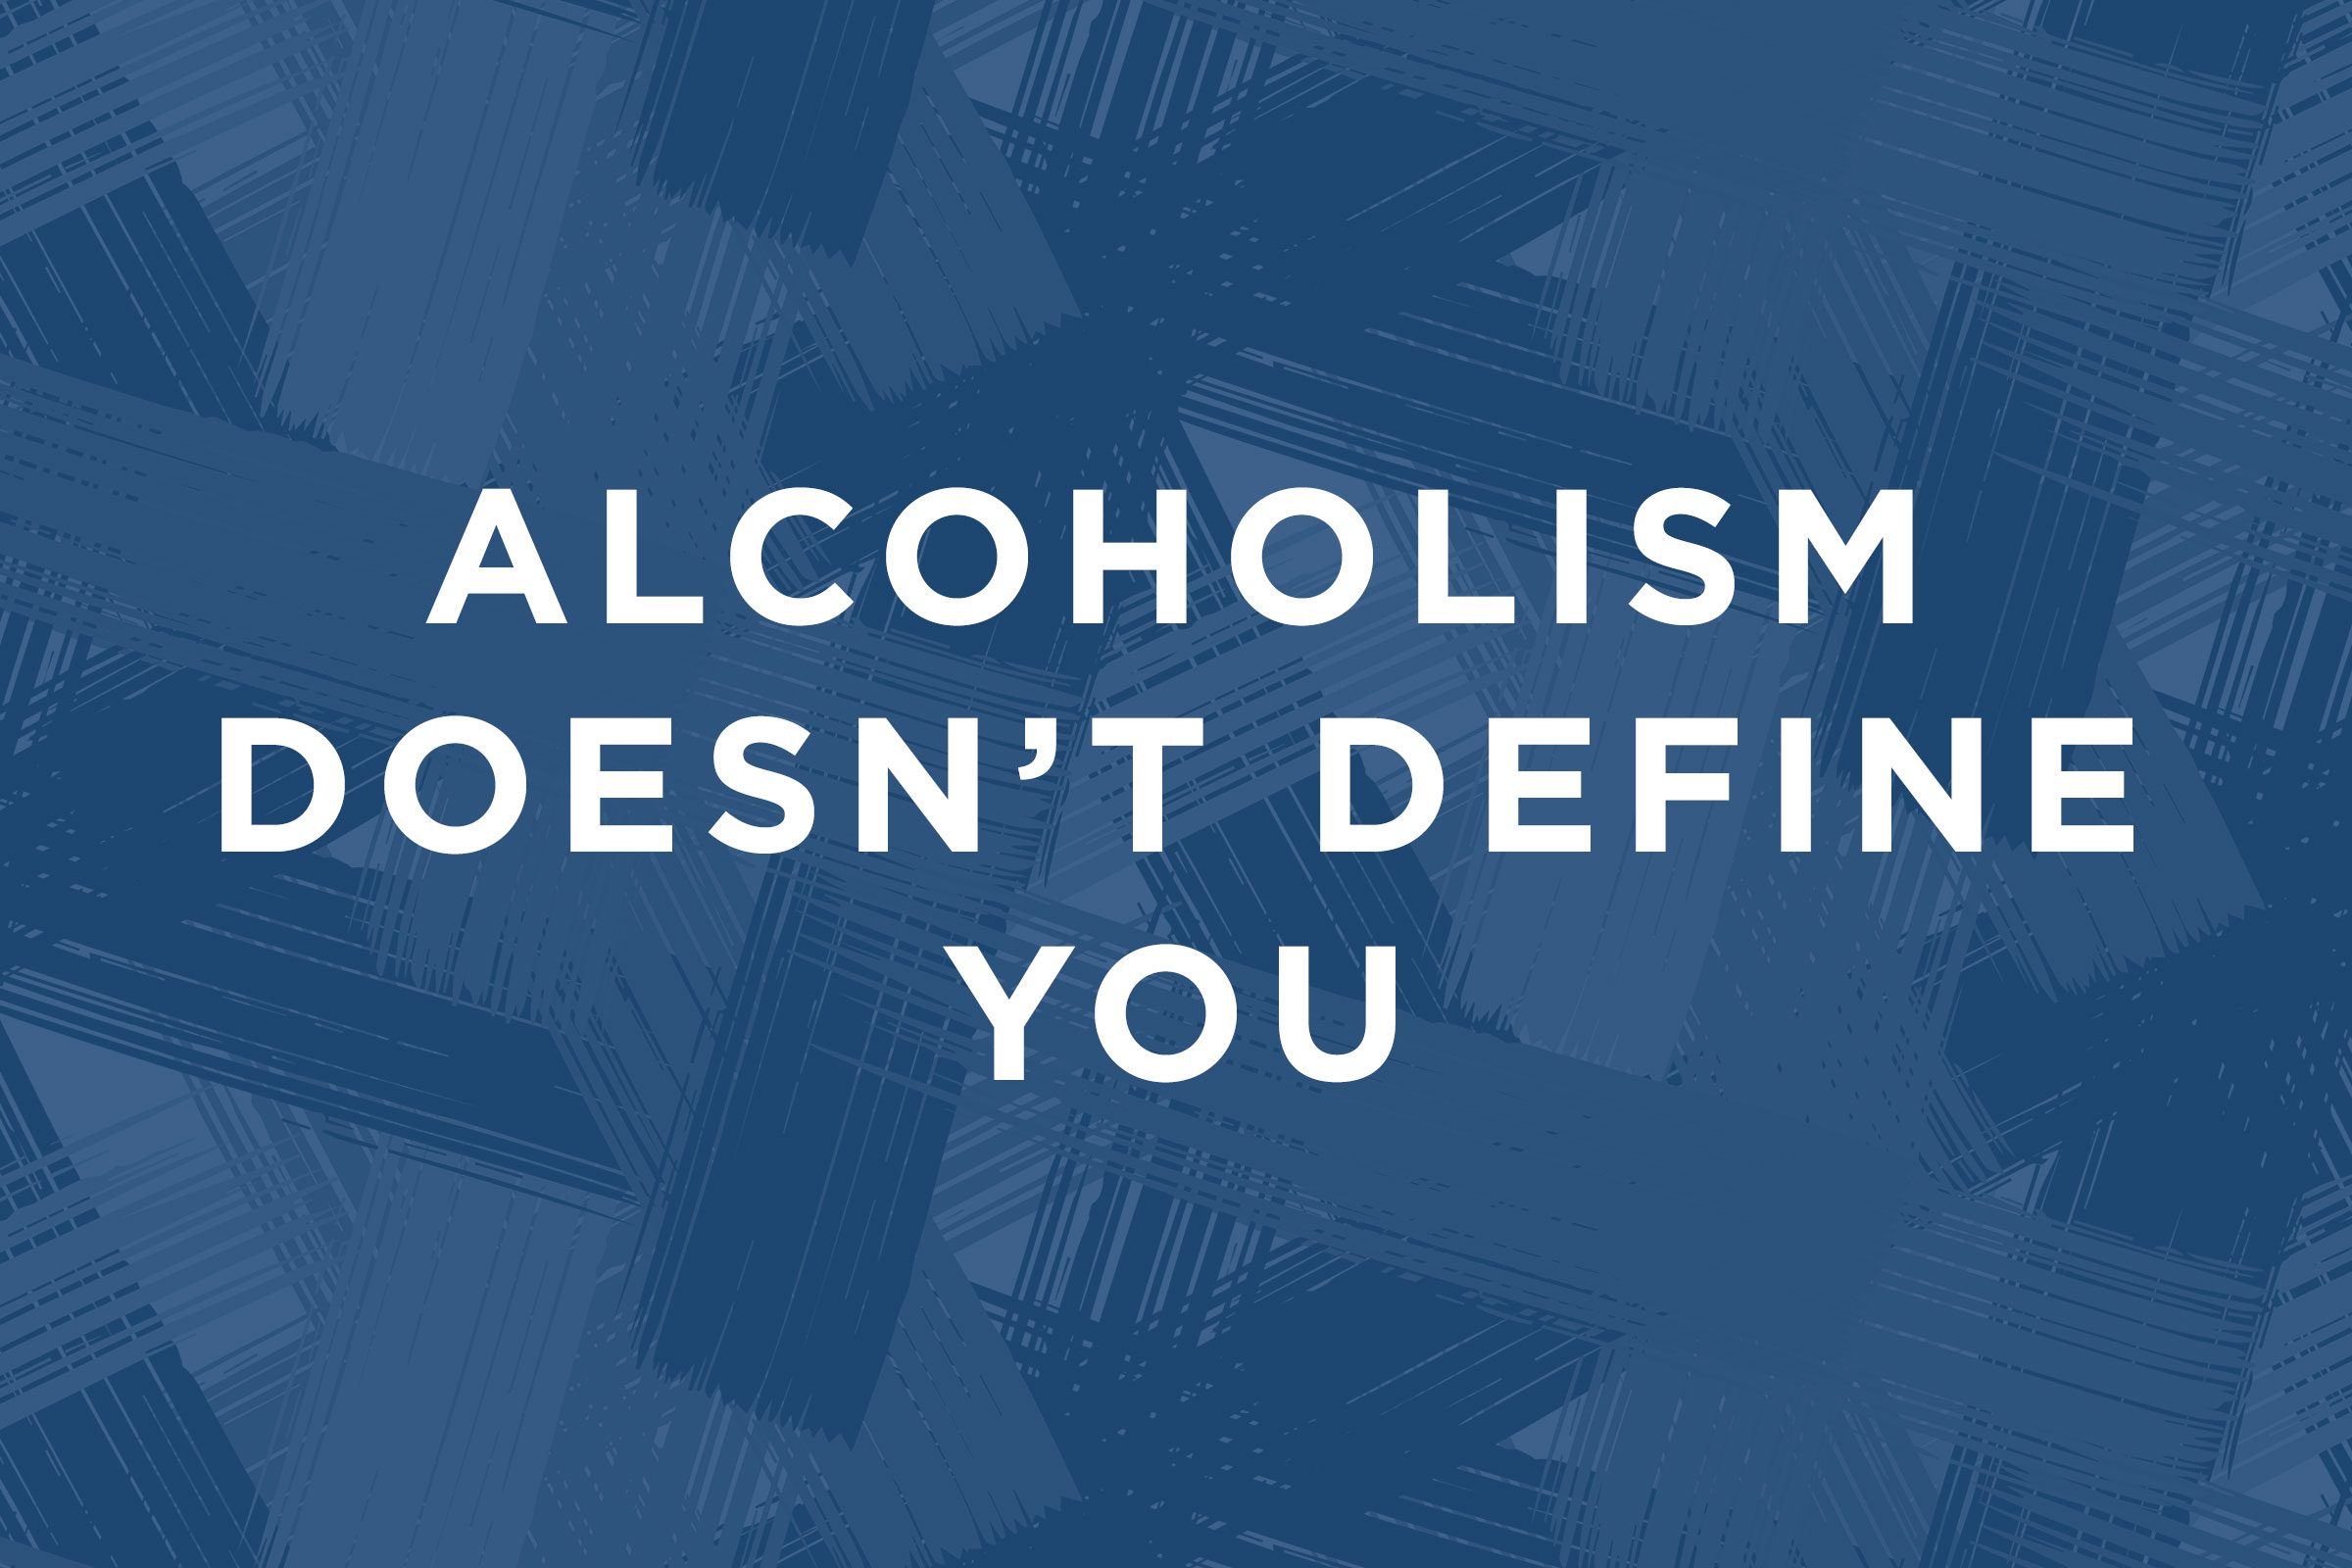 Actually, you are not an alcoholic